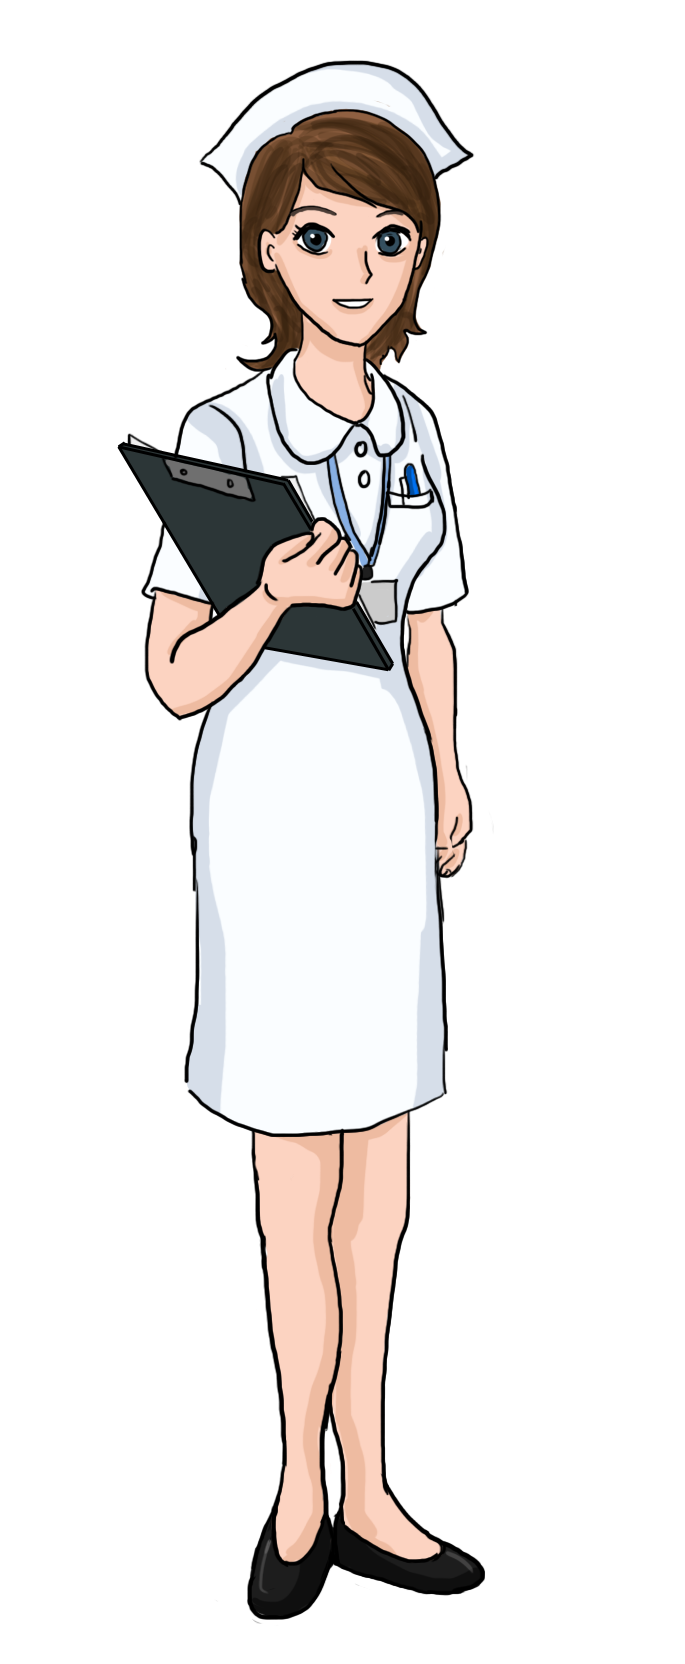 Free Nurse Clip Art of Cartoon pictures of nurses clipart image for your  personal projects, presentations or web designs.